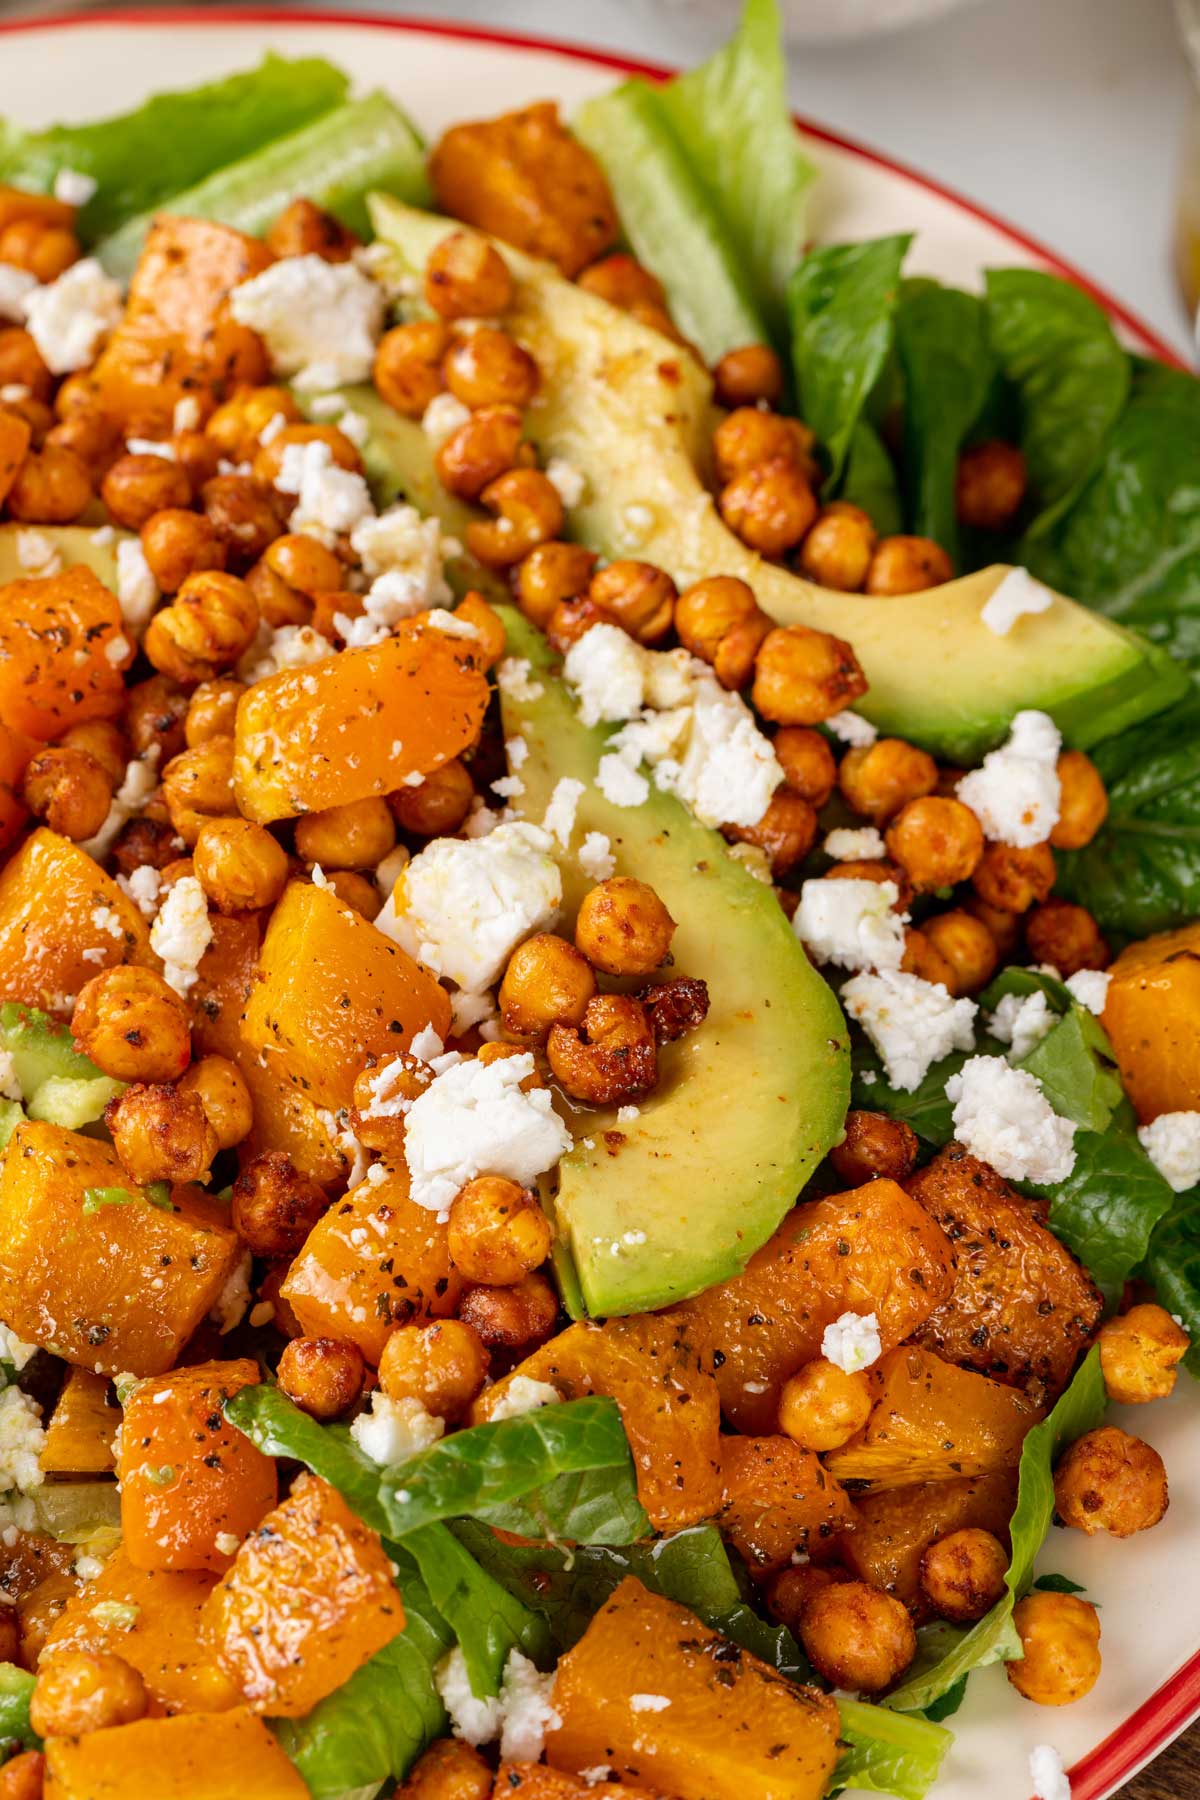 Roasted pumpkin salad with crunchy chickpeas and feta cheese